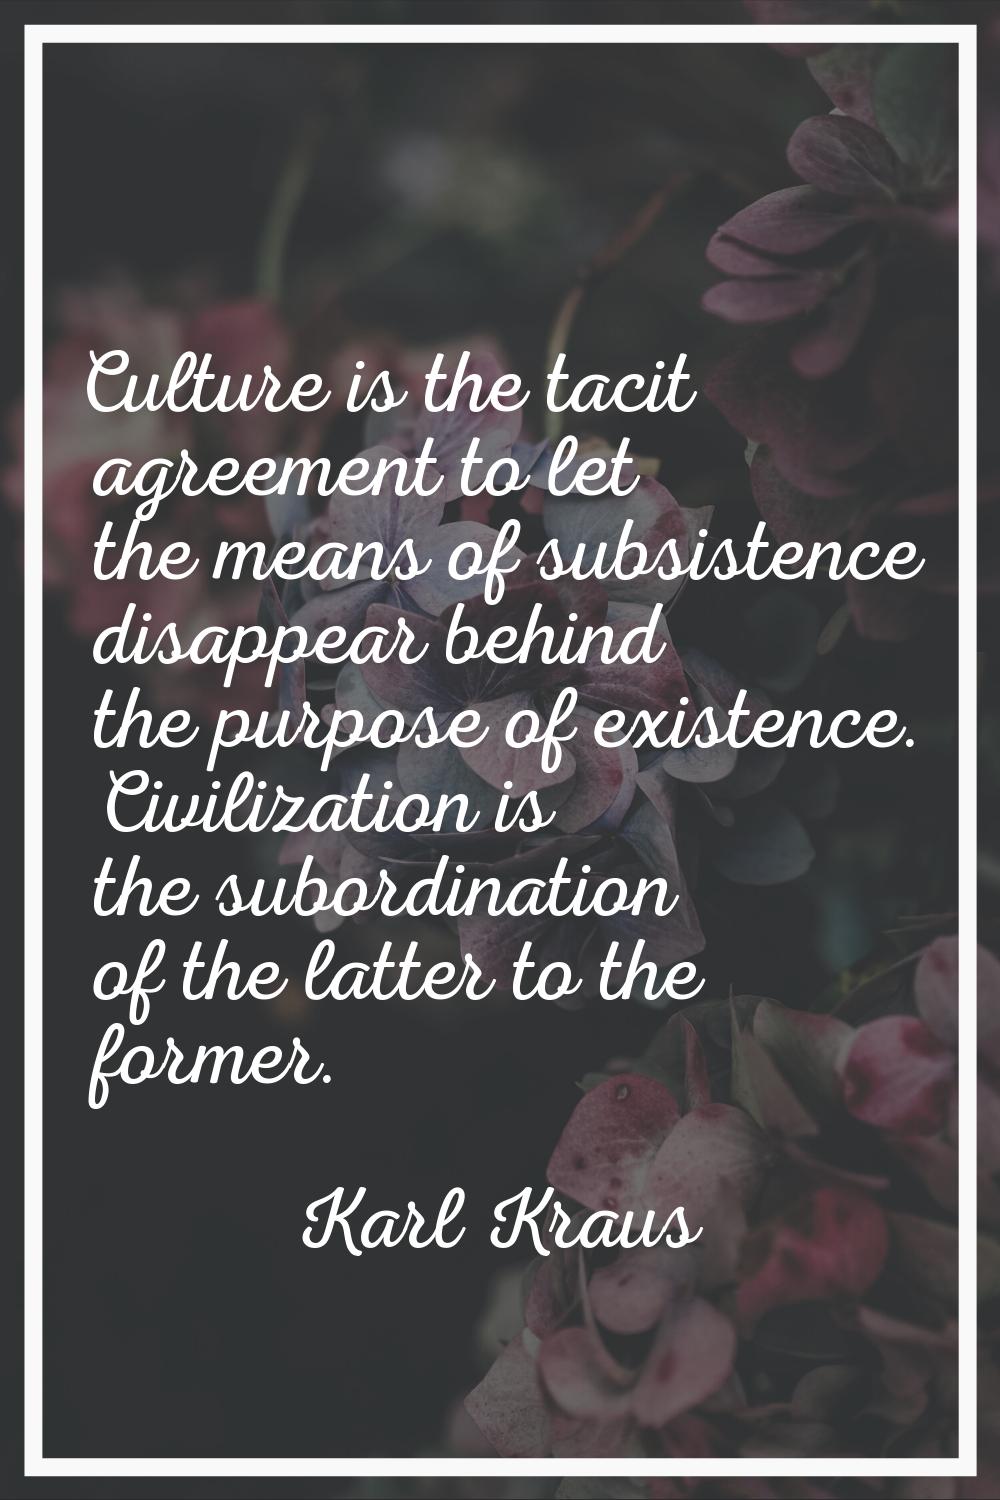 Culture is the tacit agreement to let the means of subsistence disappear behind the purpose of exis